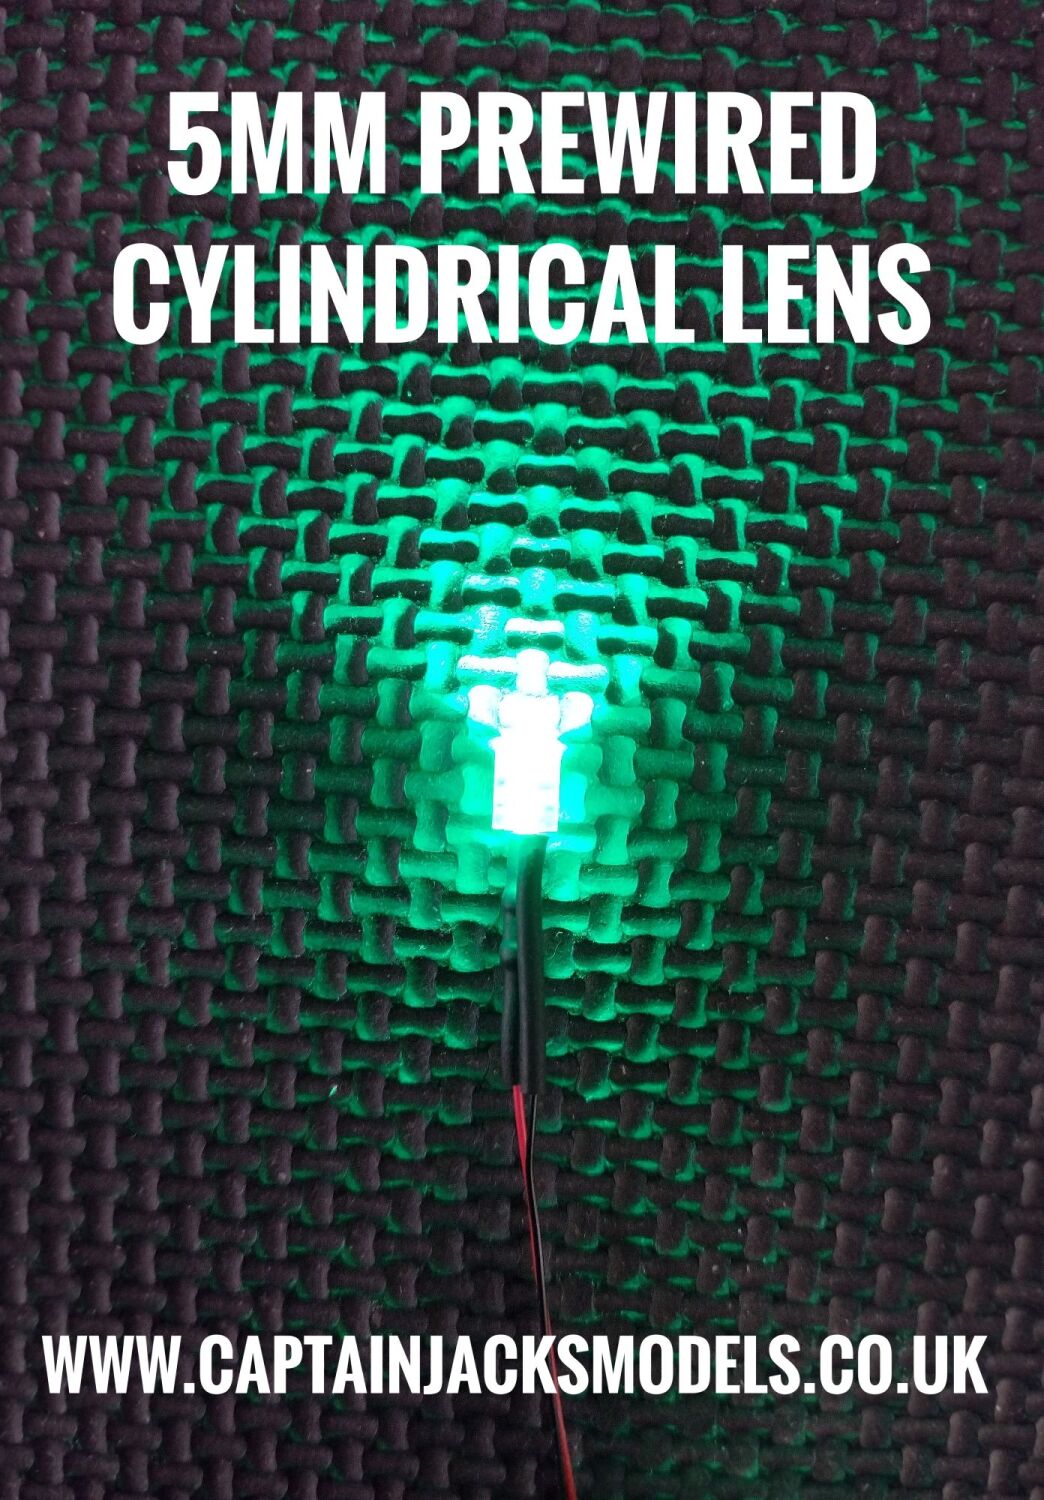 Qty 1 - Prewired RED 5mm Cylindrical Led - 0.5mm Wires 500mm Long